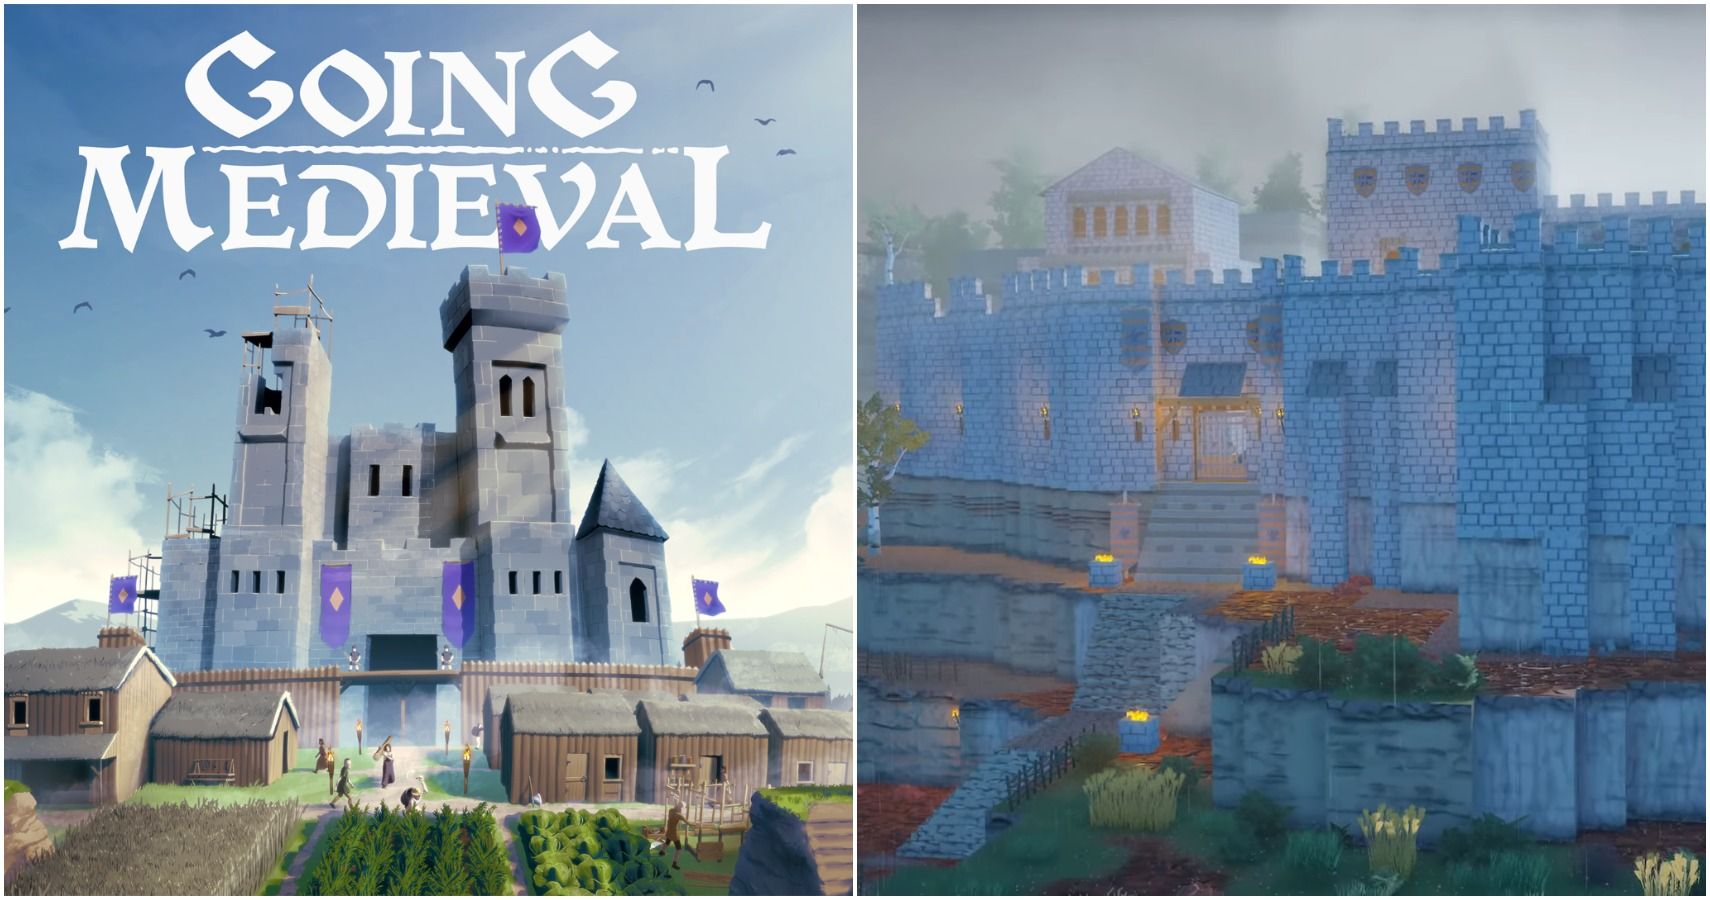 castle and header image for going medieval